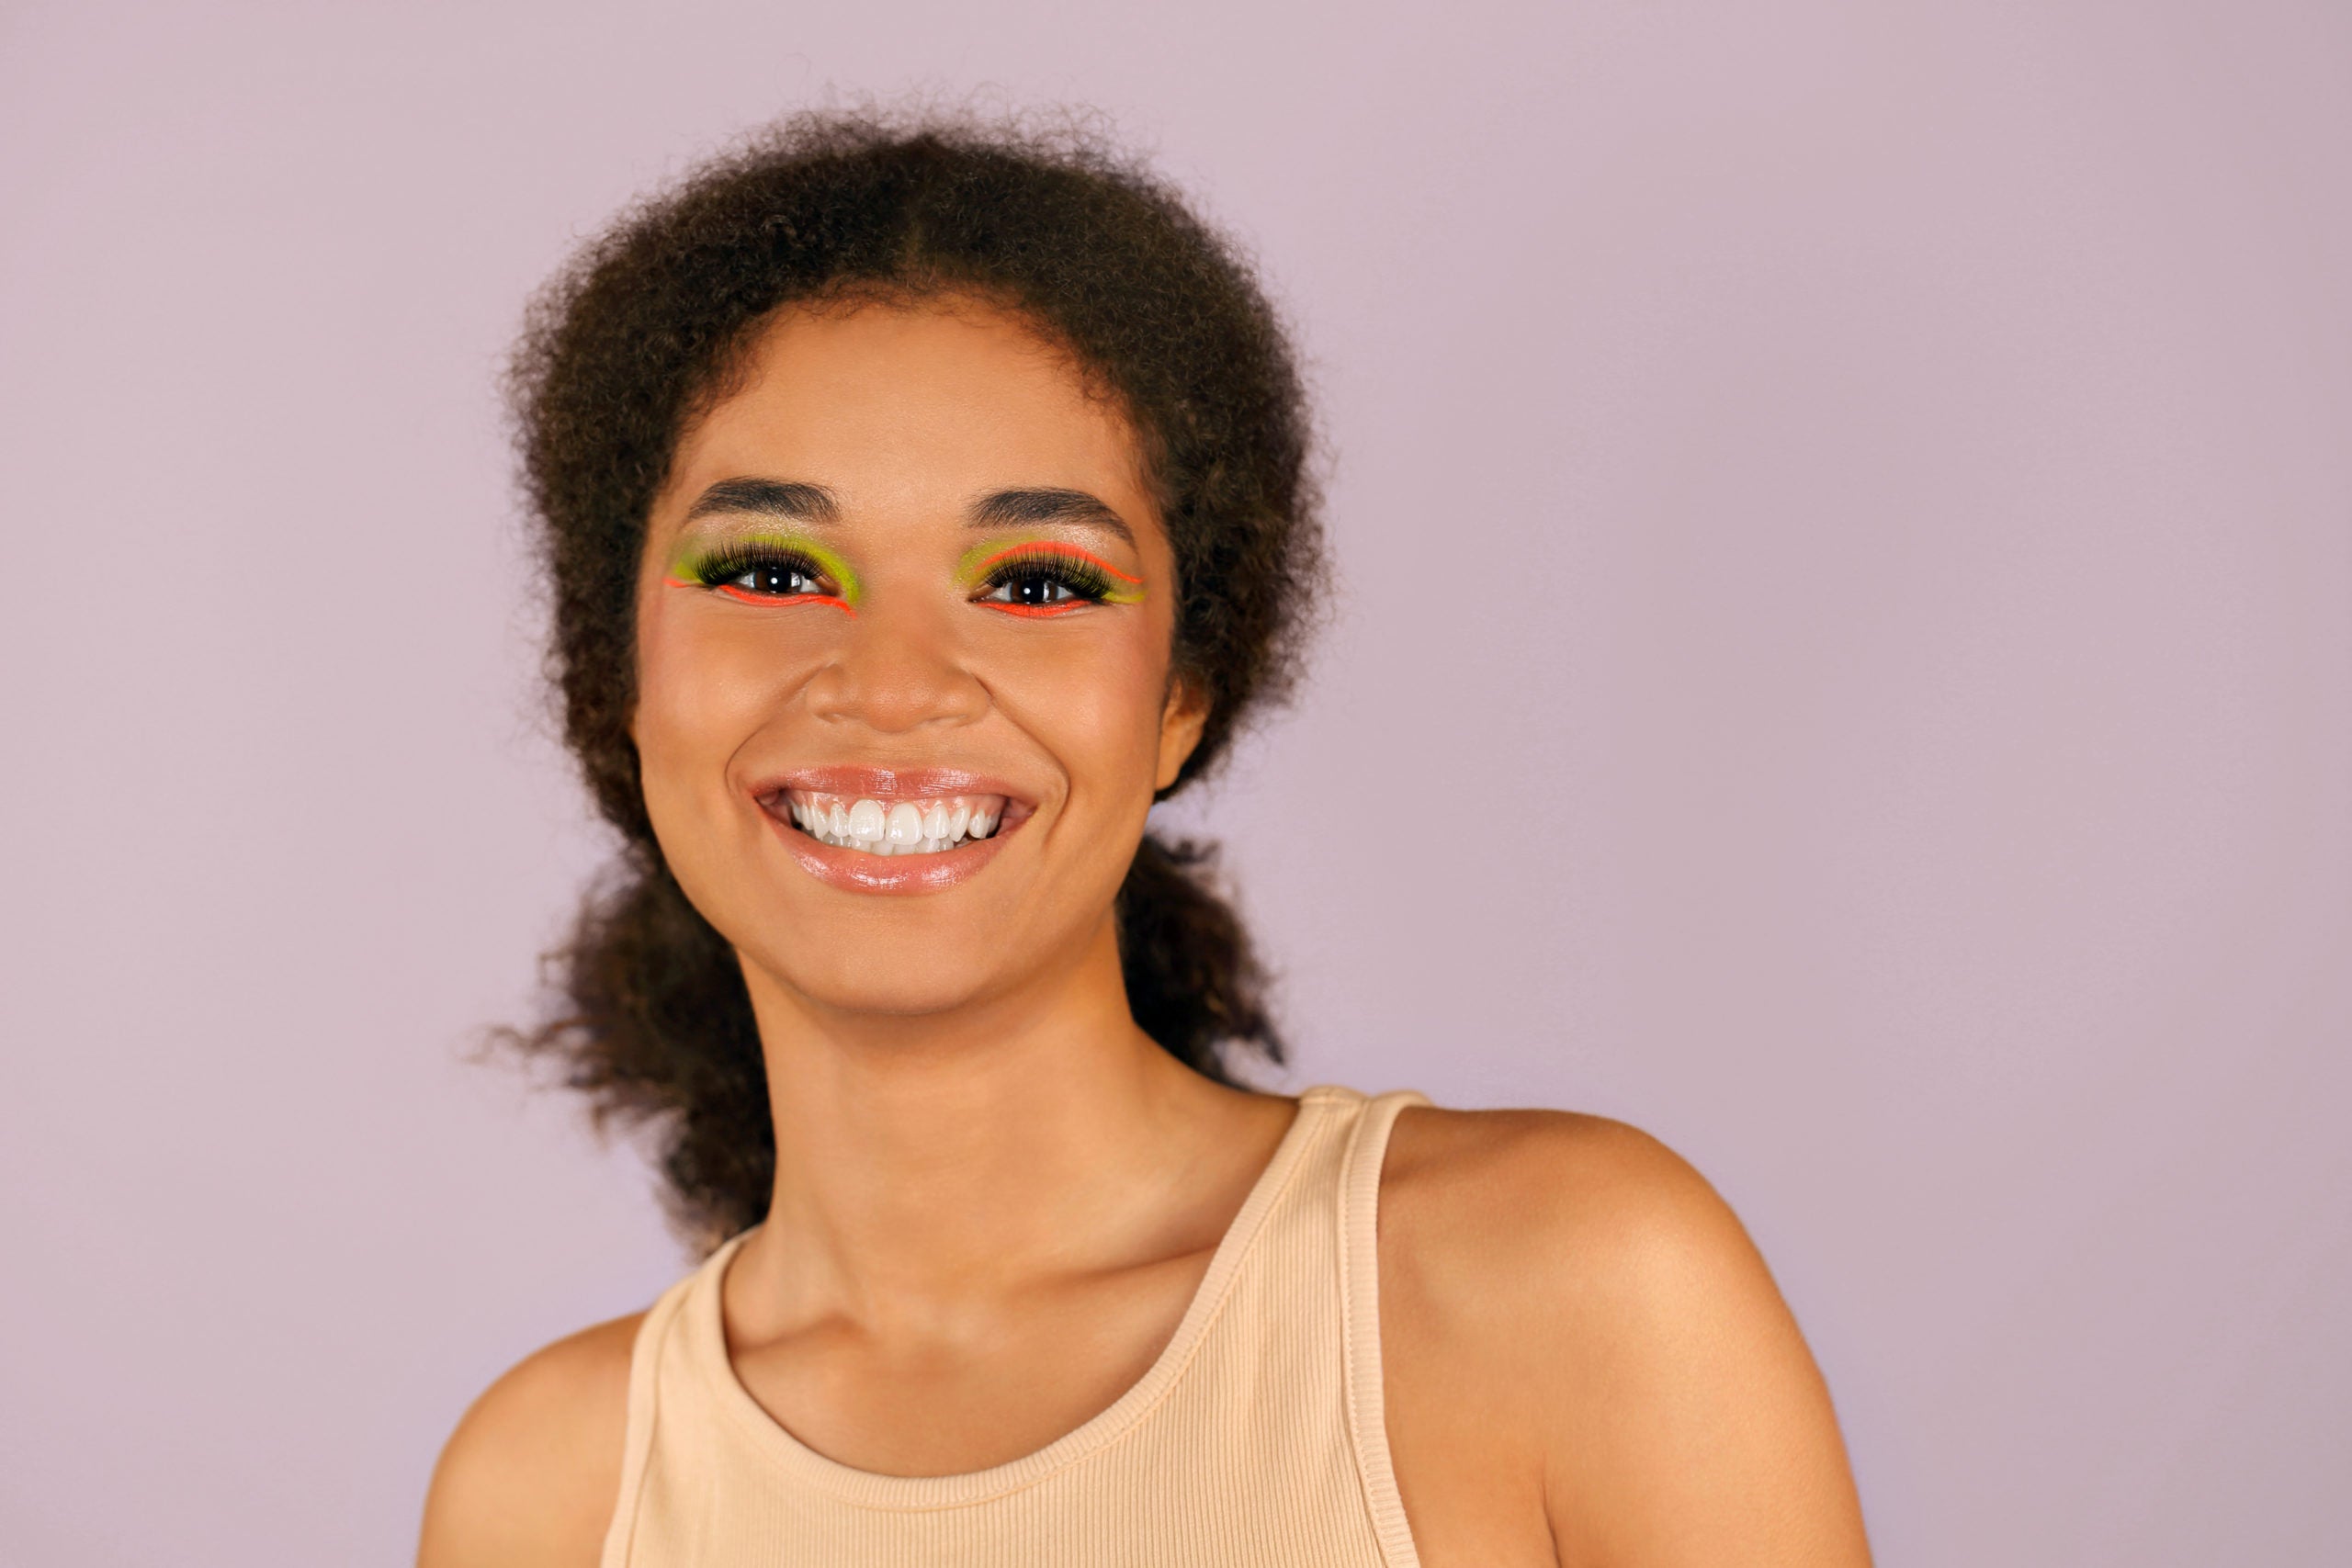 Young woman smiling with colorful graphic eye makeup